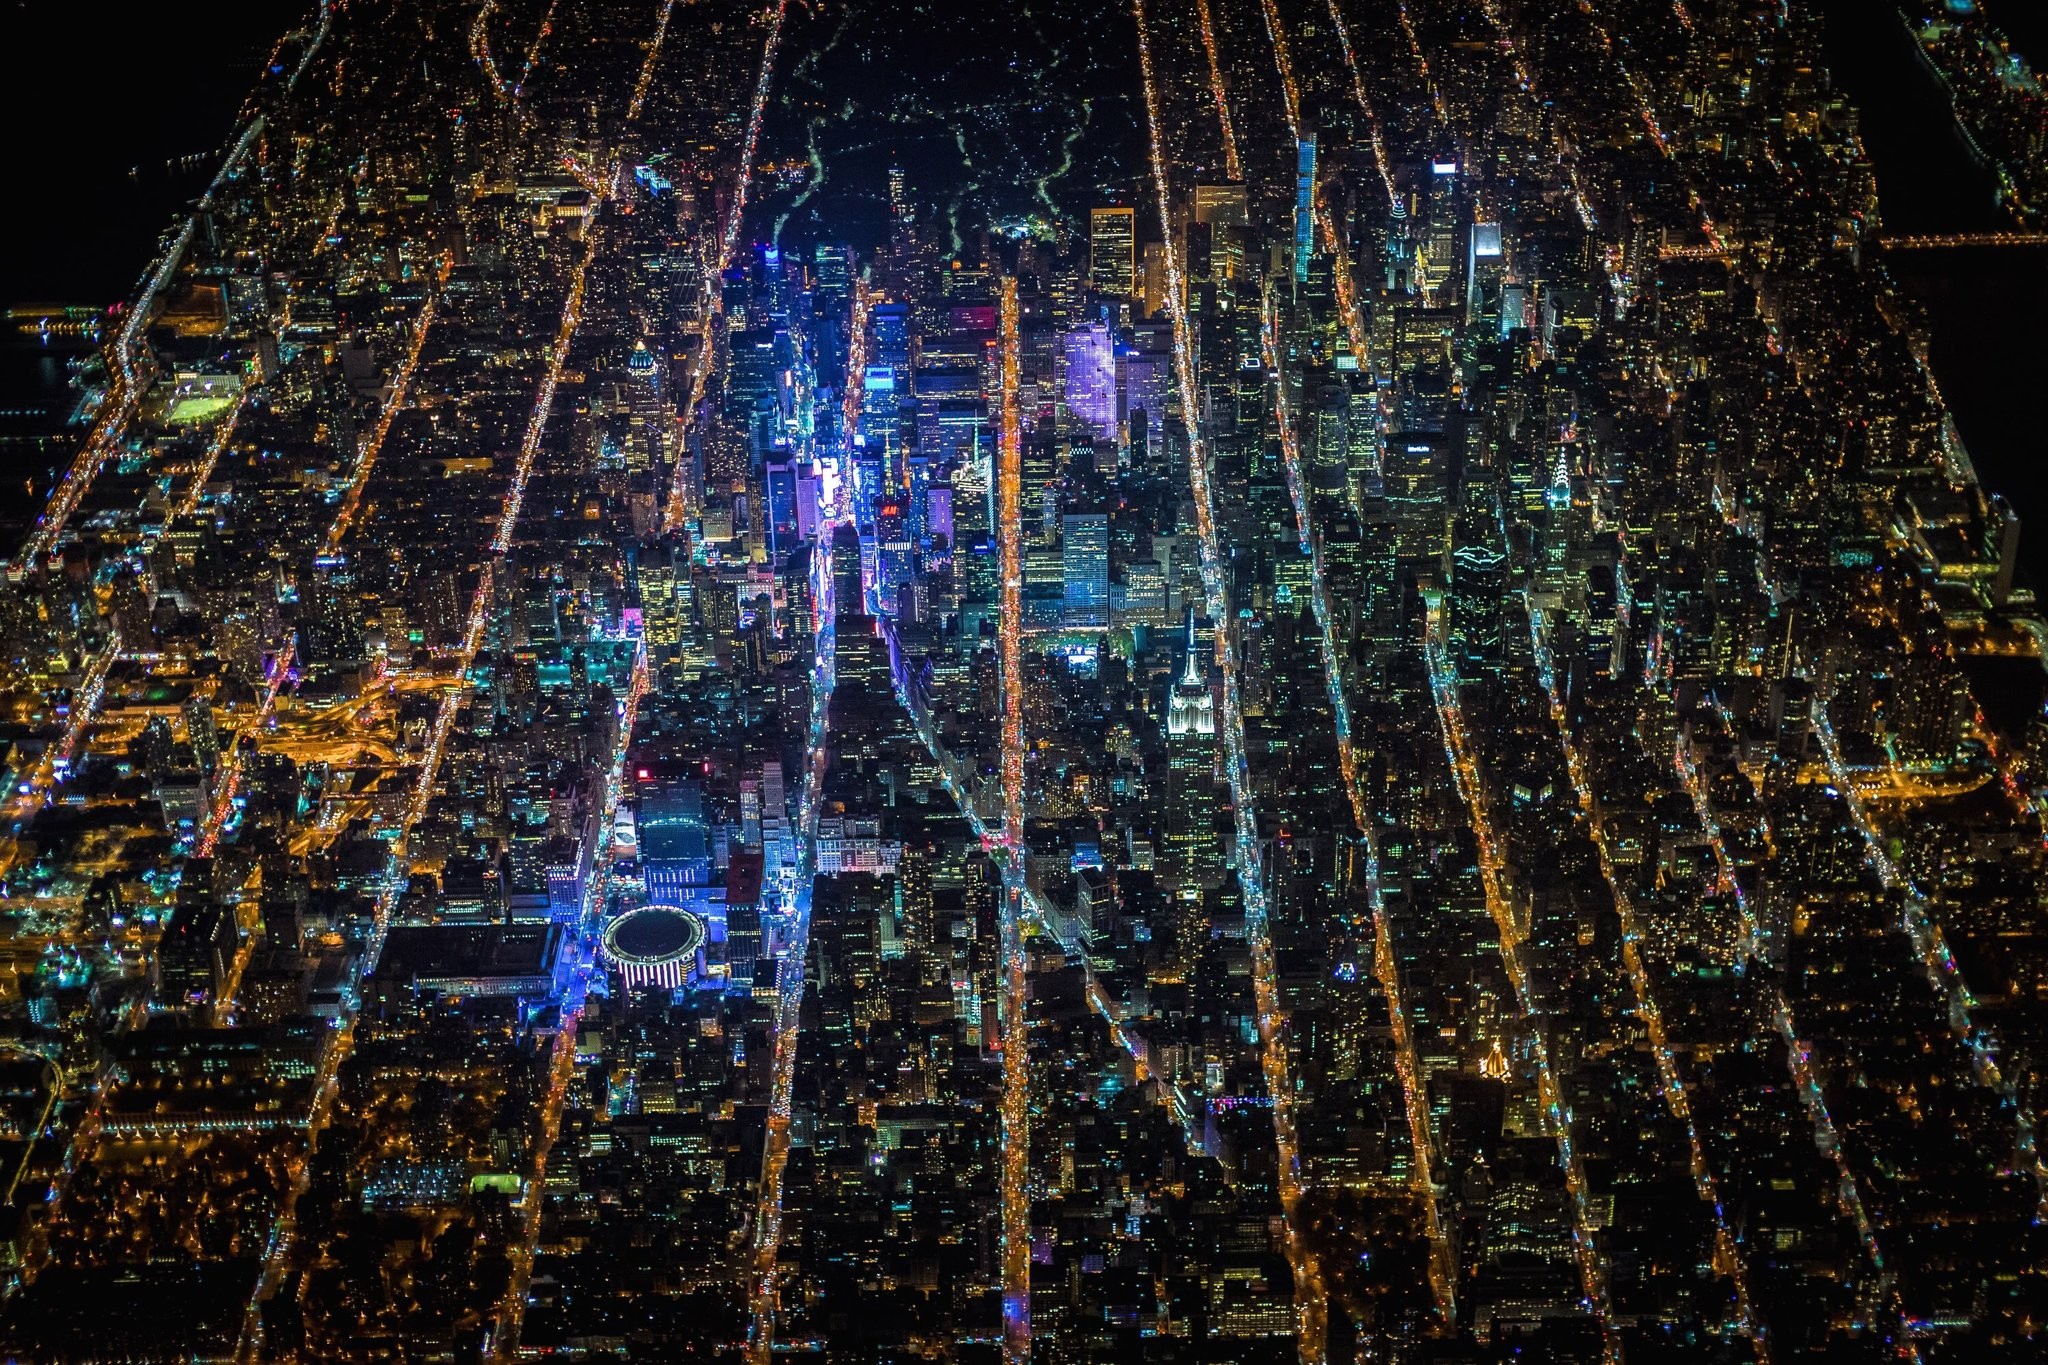 General 2048x1365 Times Square USA night city aerial view city lights cityscape